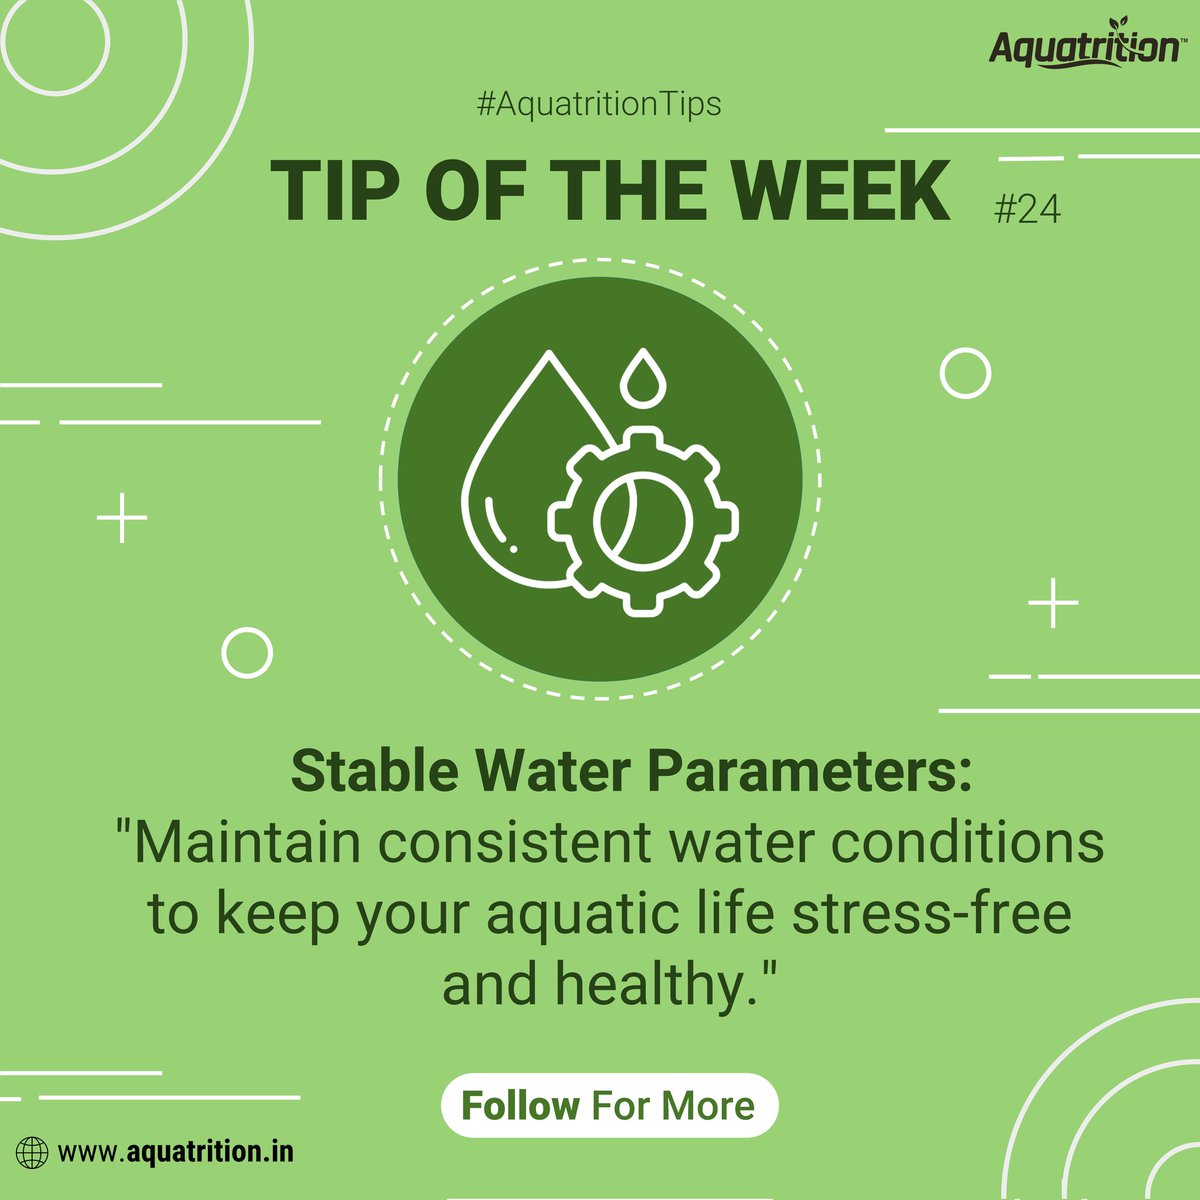 Aquatrition's #tipoftheweek! Elevate your planted aquarium journey with our expertly curated tips. Stay tuned every week! Follow for more, and don't forget to spread the knowledge with fellow aquatic enthusiast.

#protipfriday #usefultips #learnsomethingnew #funfactfriday